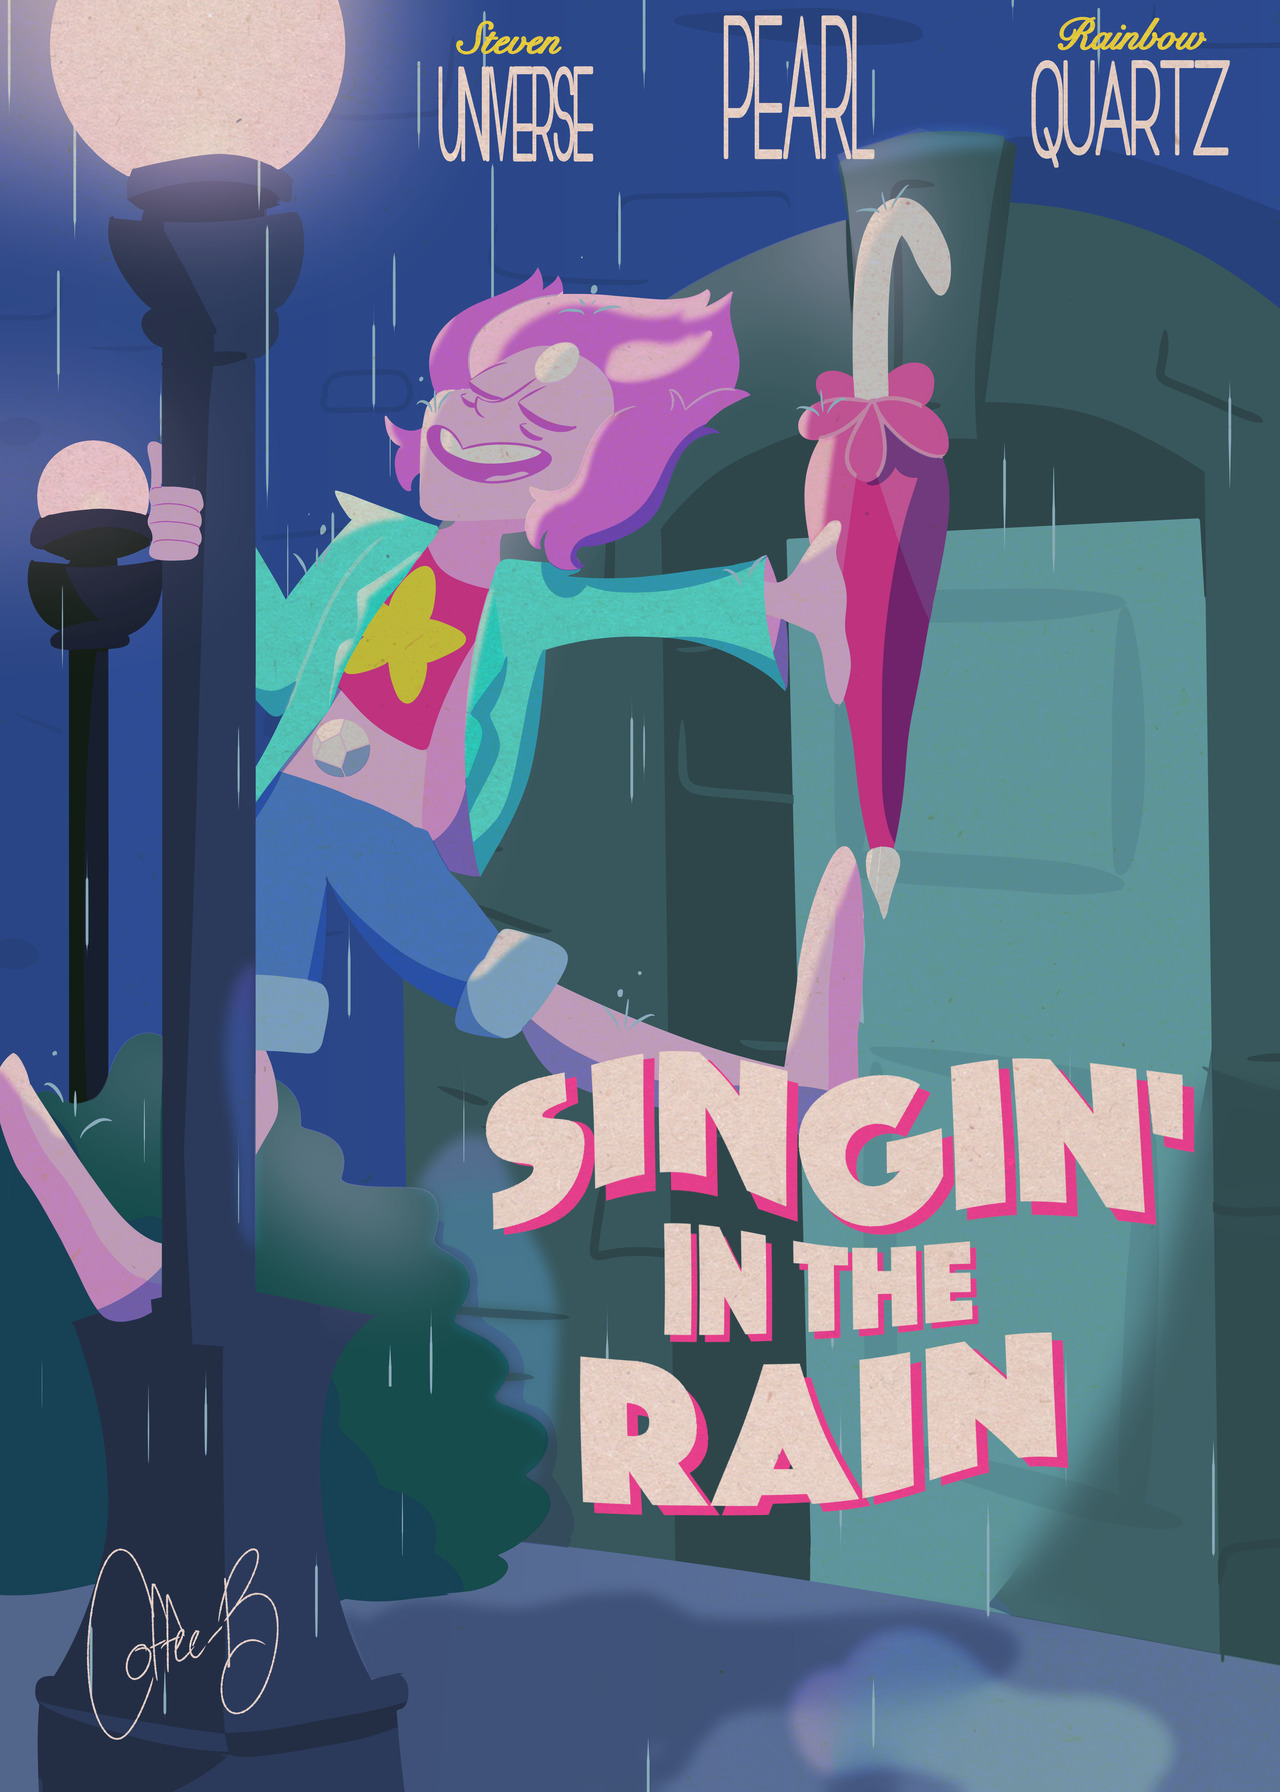 a rainbow quartz based on the old poster for singin’ in the rain!!!